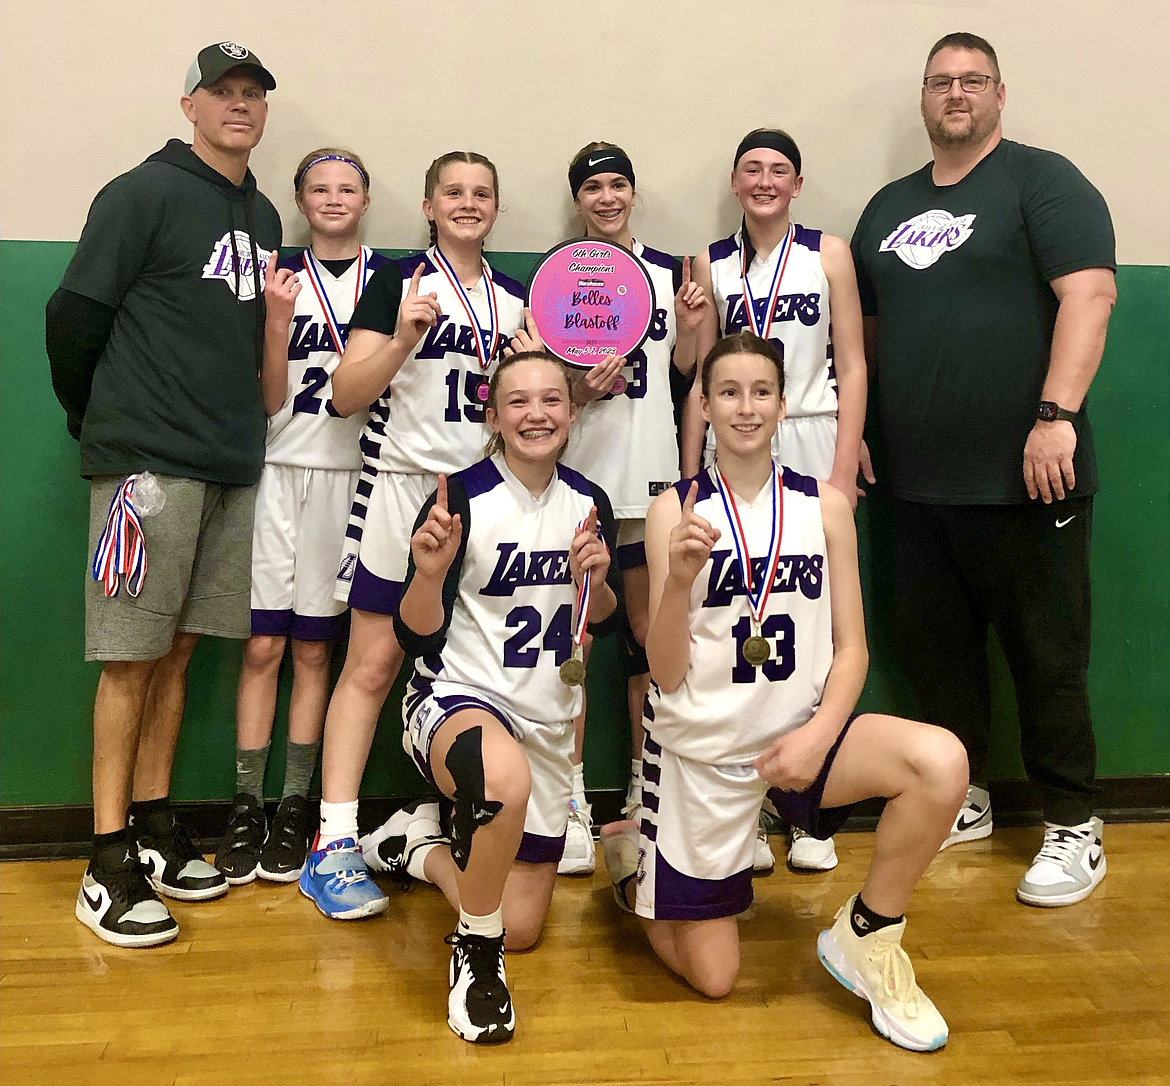 Courtesy photo
The Coeur d'Alene Lakers sixth grade girls AAU basketball team won the 2023 Belle's Blastoff basketball tournament in Spokane. In the front row from left are Emmerson Cummings and Noelia Axton; and back row from left, coach Royce Johnston, Brynlee Johnston, Savannah Stevens, Allie Jenkin, Payton Brown and coach Corey Brown.